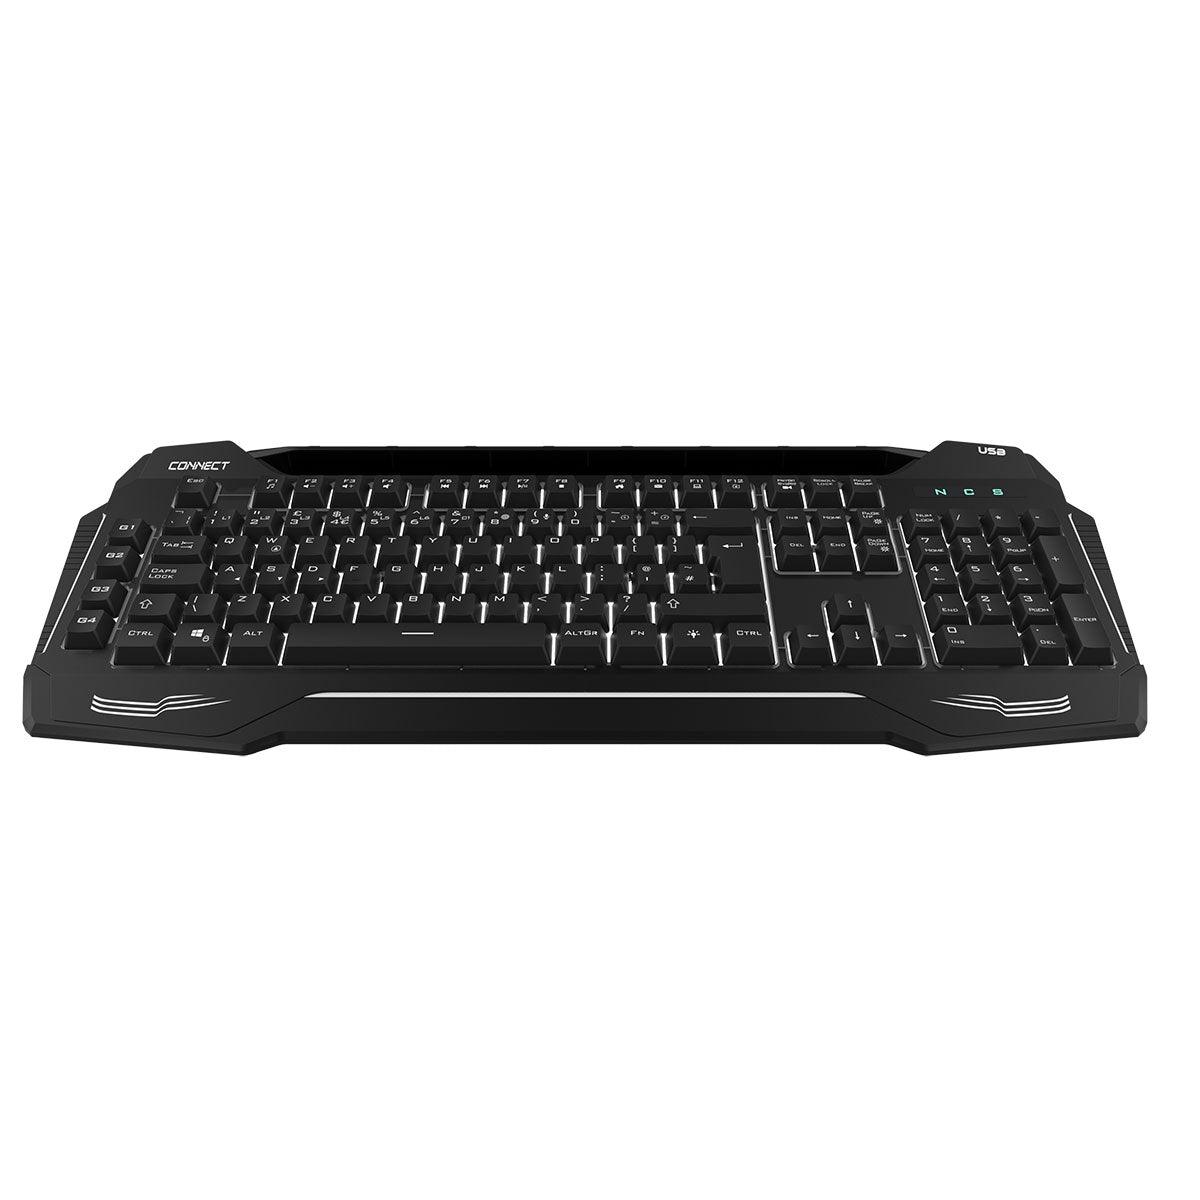 CiT Connect Keyboard 7 Colour Led Phone Rest and USB Hub